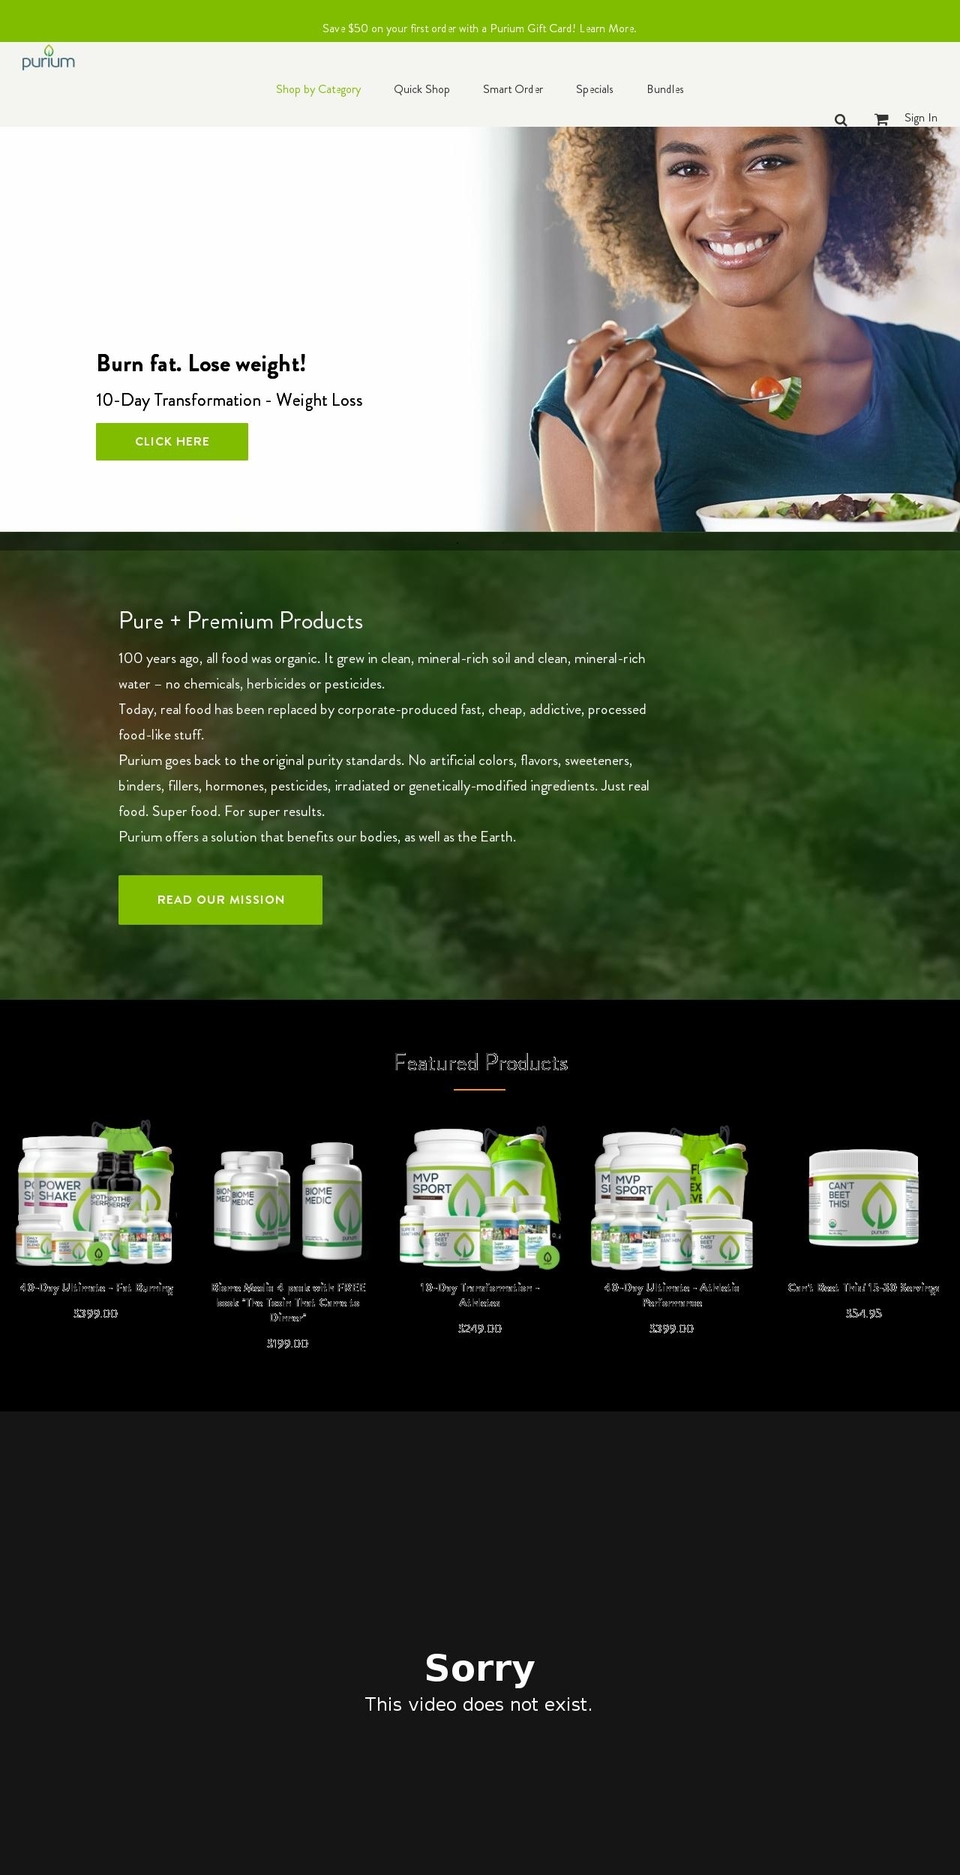 Production | BVA Shopify theme site example phpfoods.com